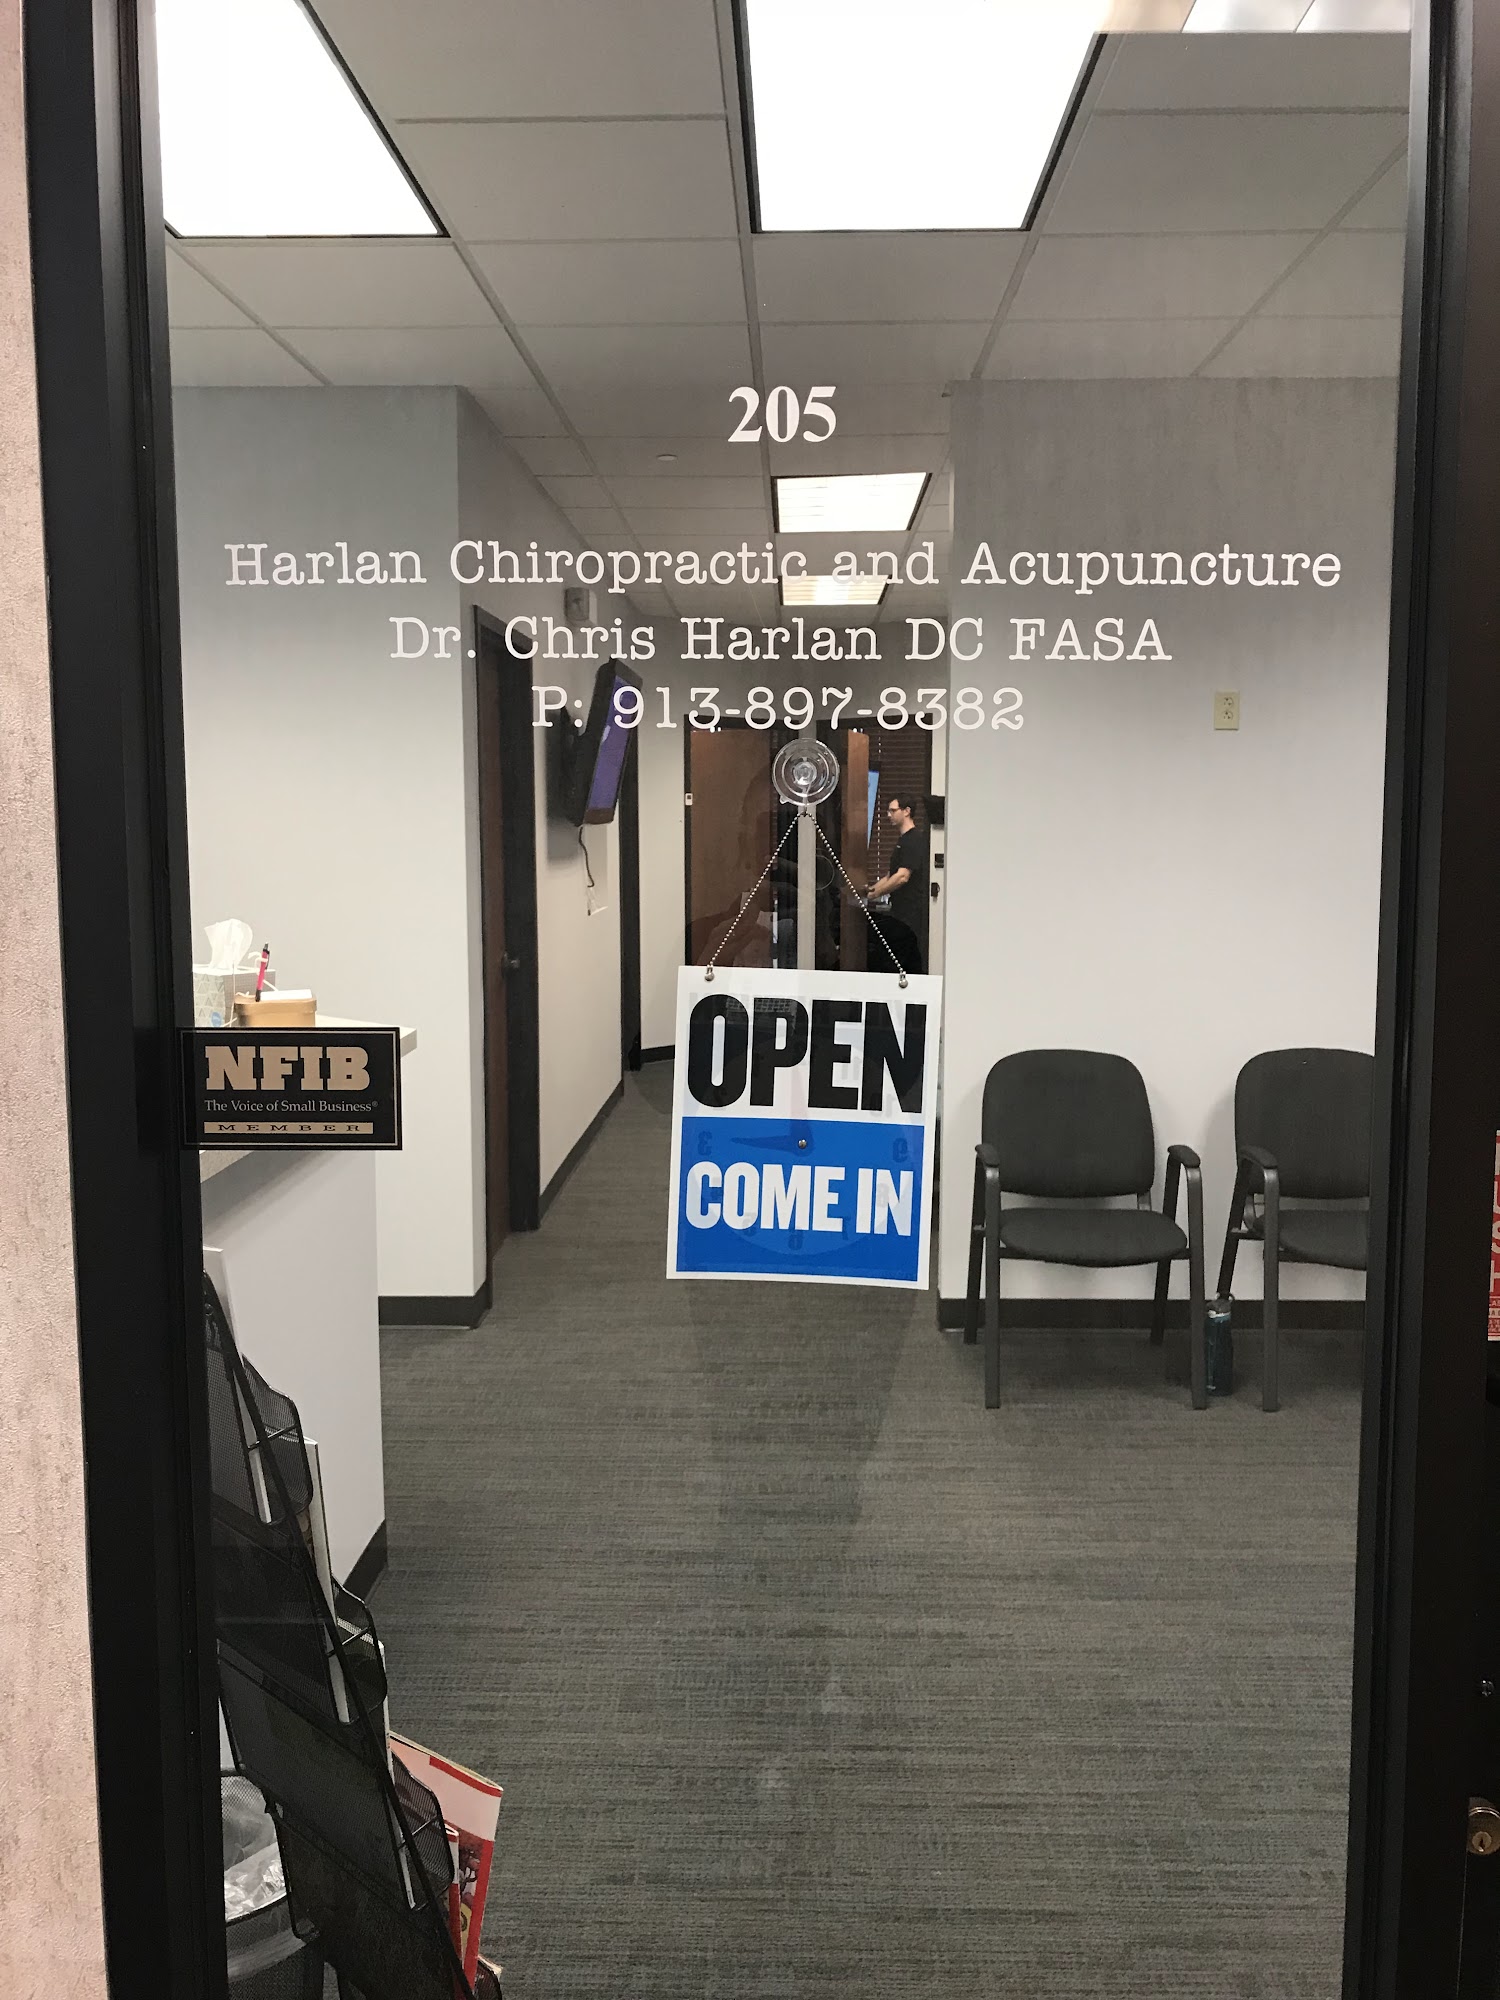 Harlan Chiropractic and Acupuncture